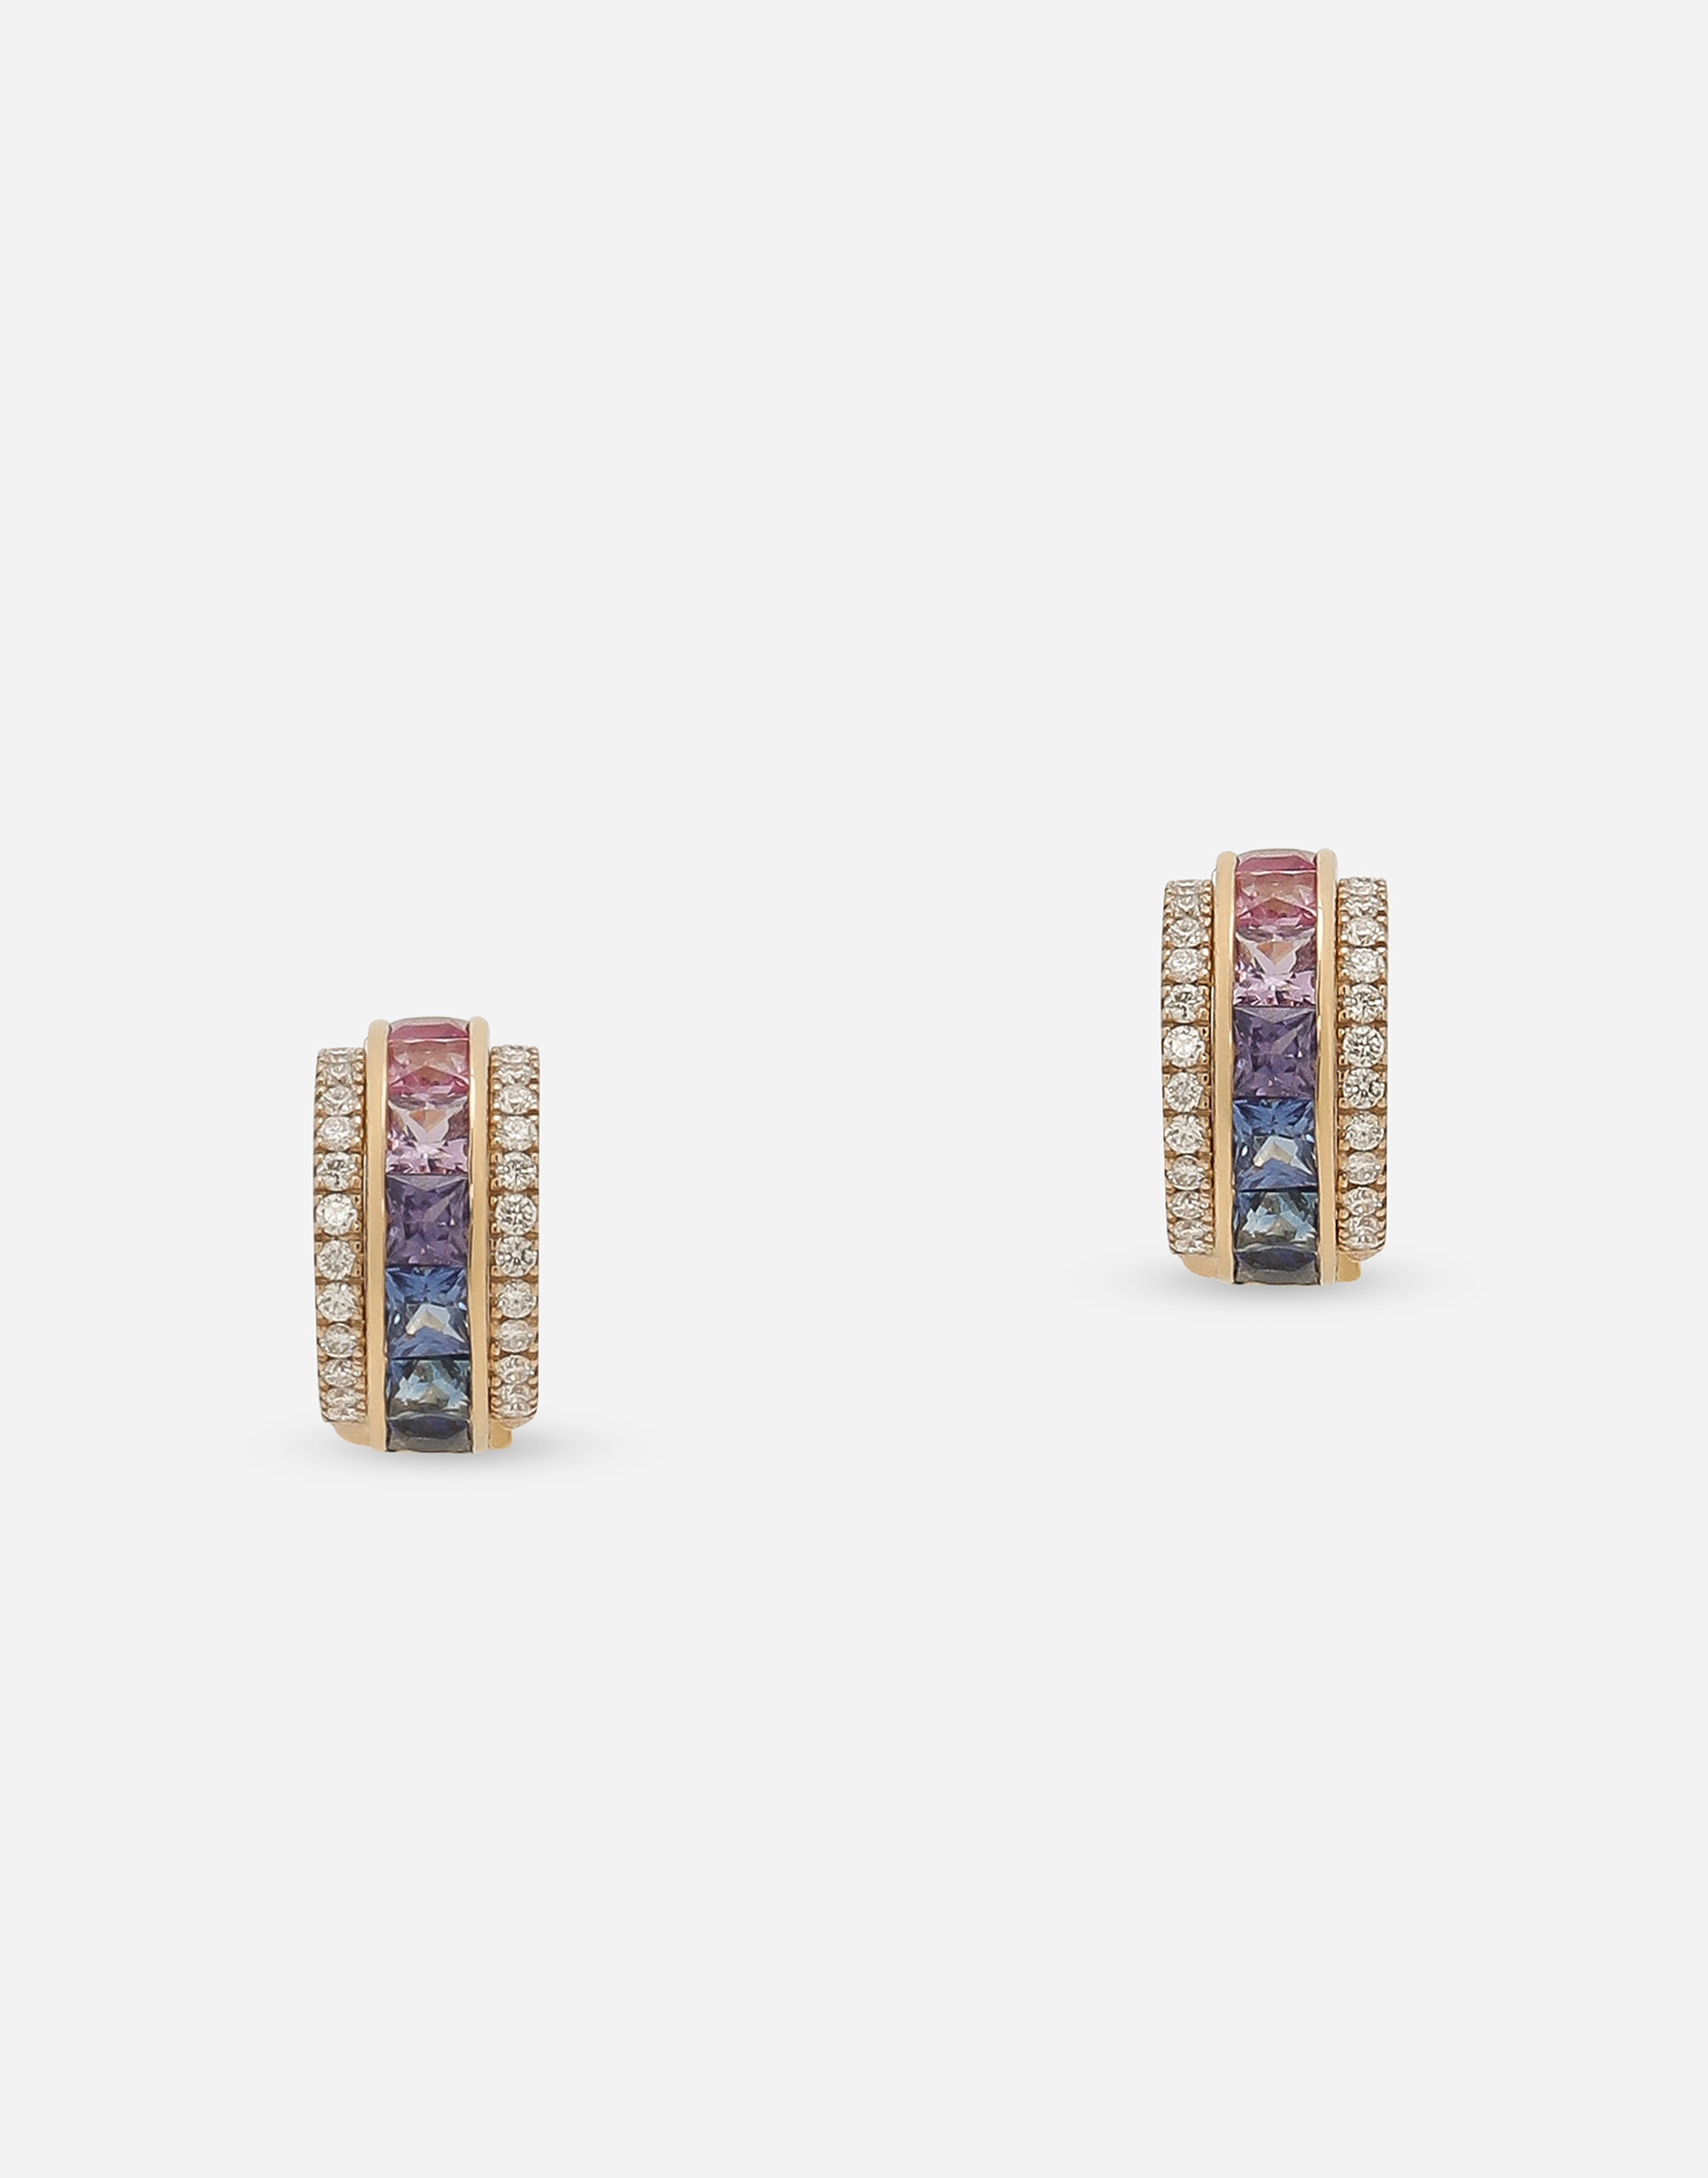 Dolce & Gabbana Rainbow Earrings In Yellow Gold 18kt With Multicolor Sapphires And Diamonds